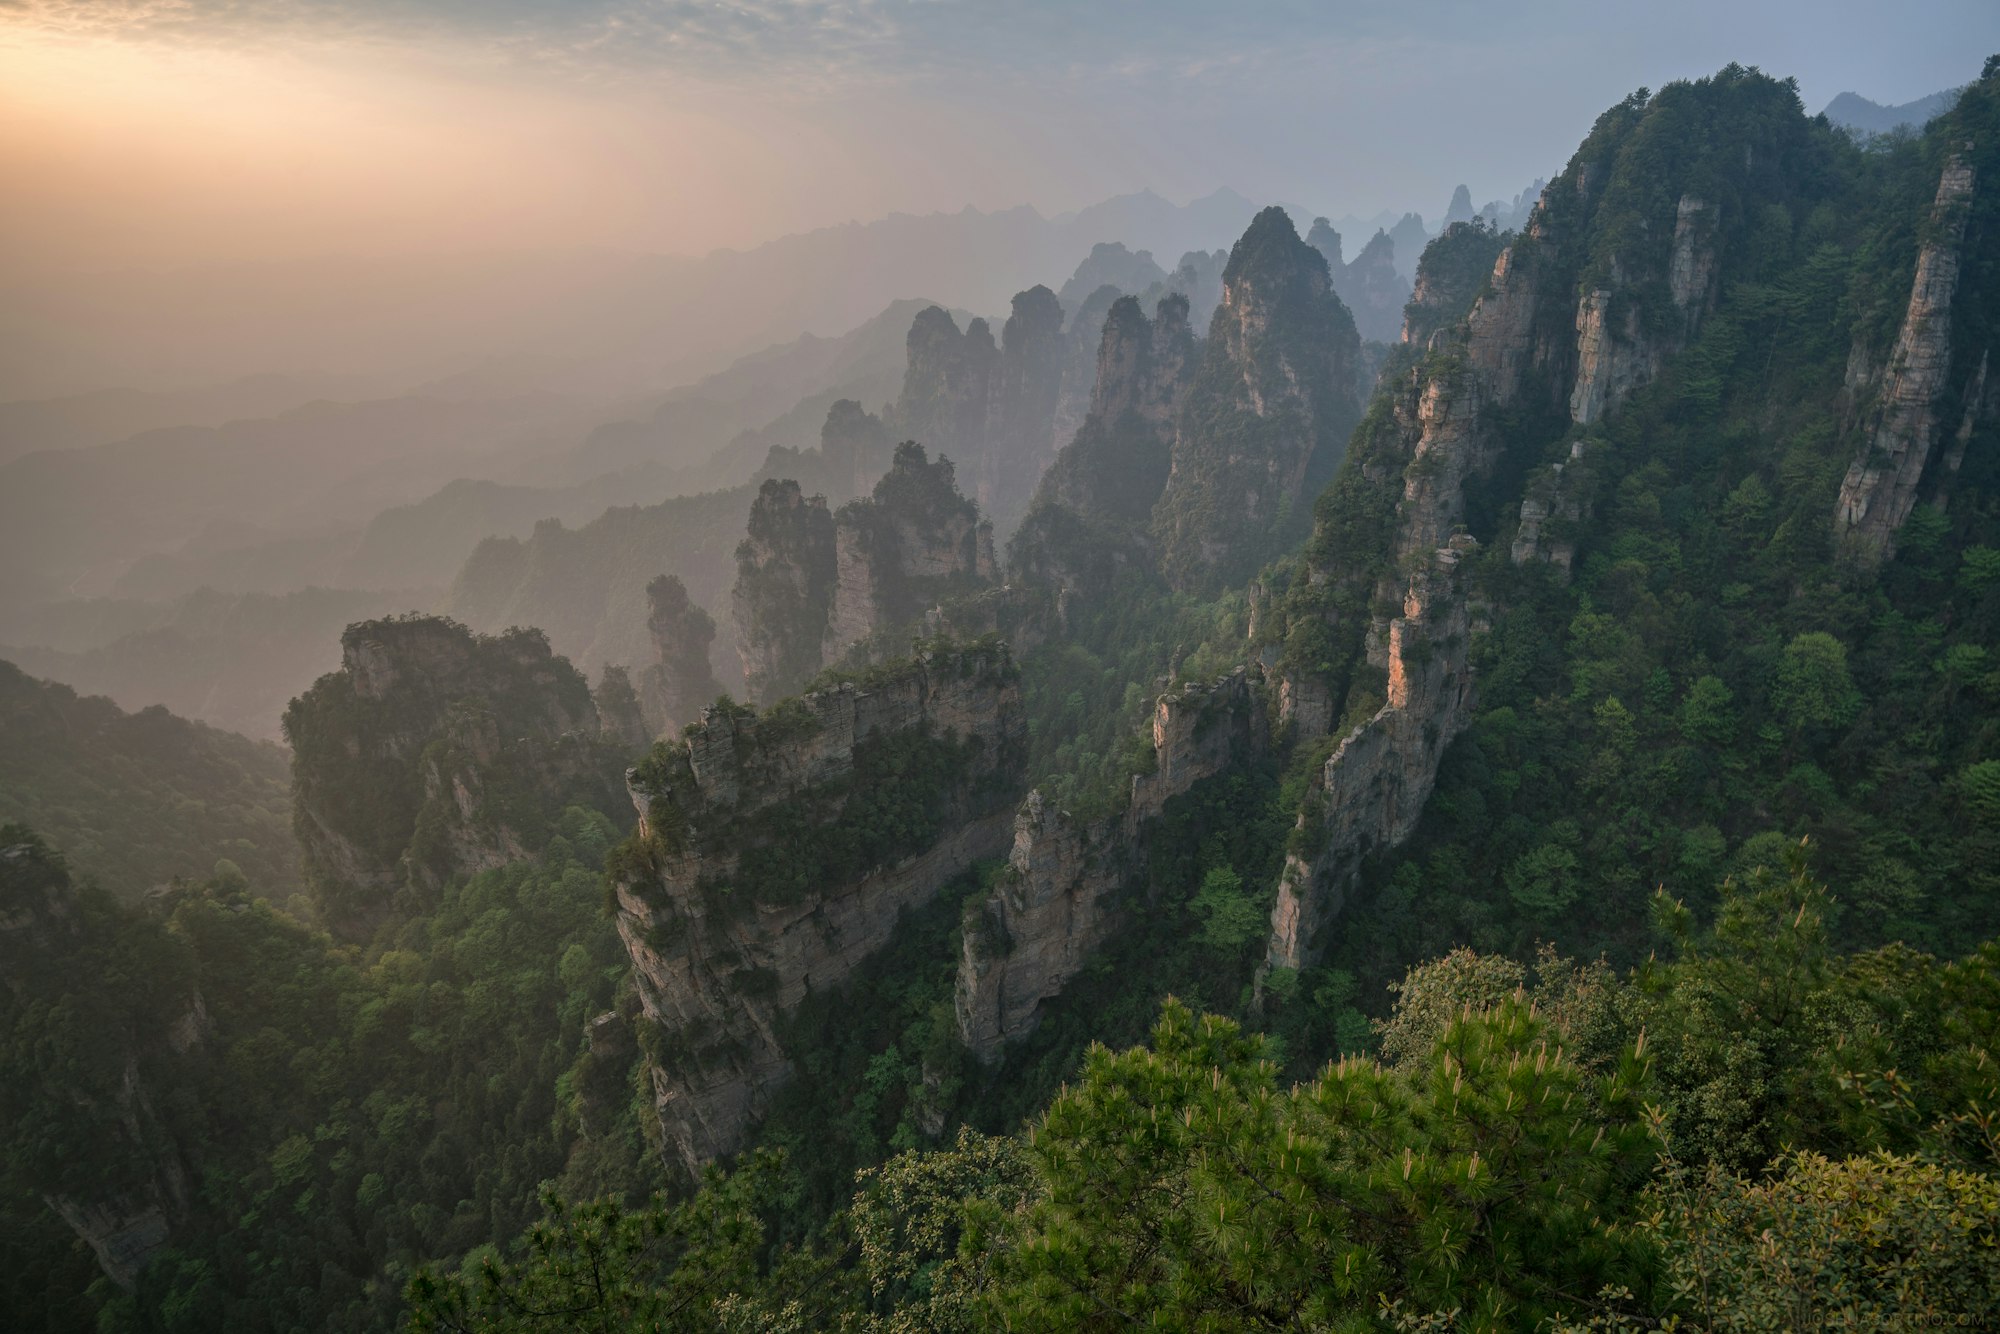 The endless, cascading mountains of Zhangjiajie comprised of many rows of rock walls.